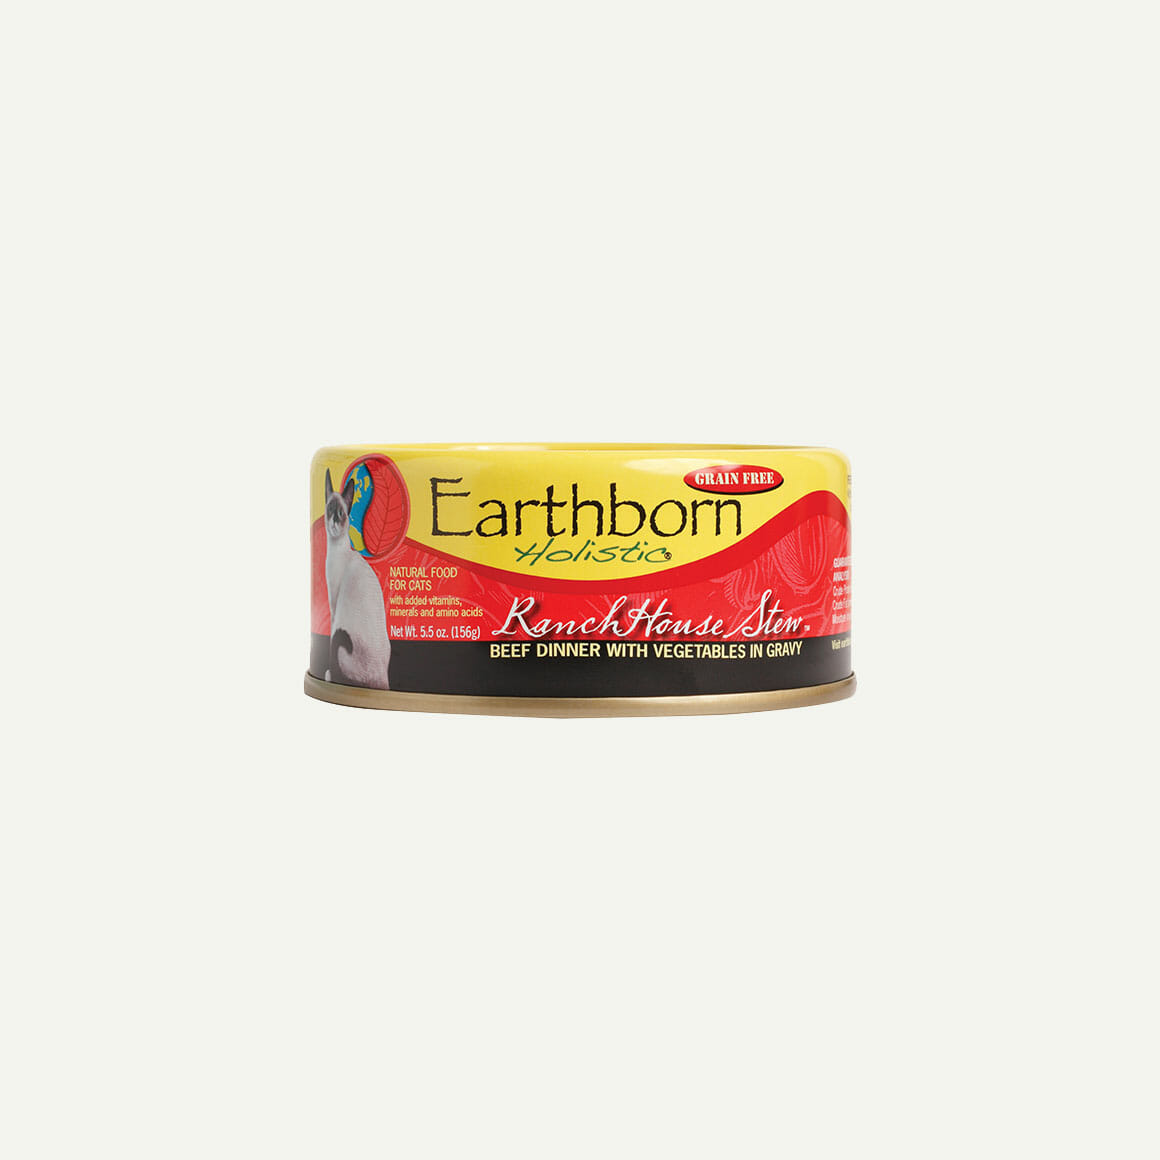 Earthborn Canned Cat Food Ranch House Stew 5oz